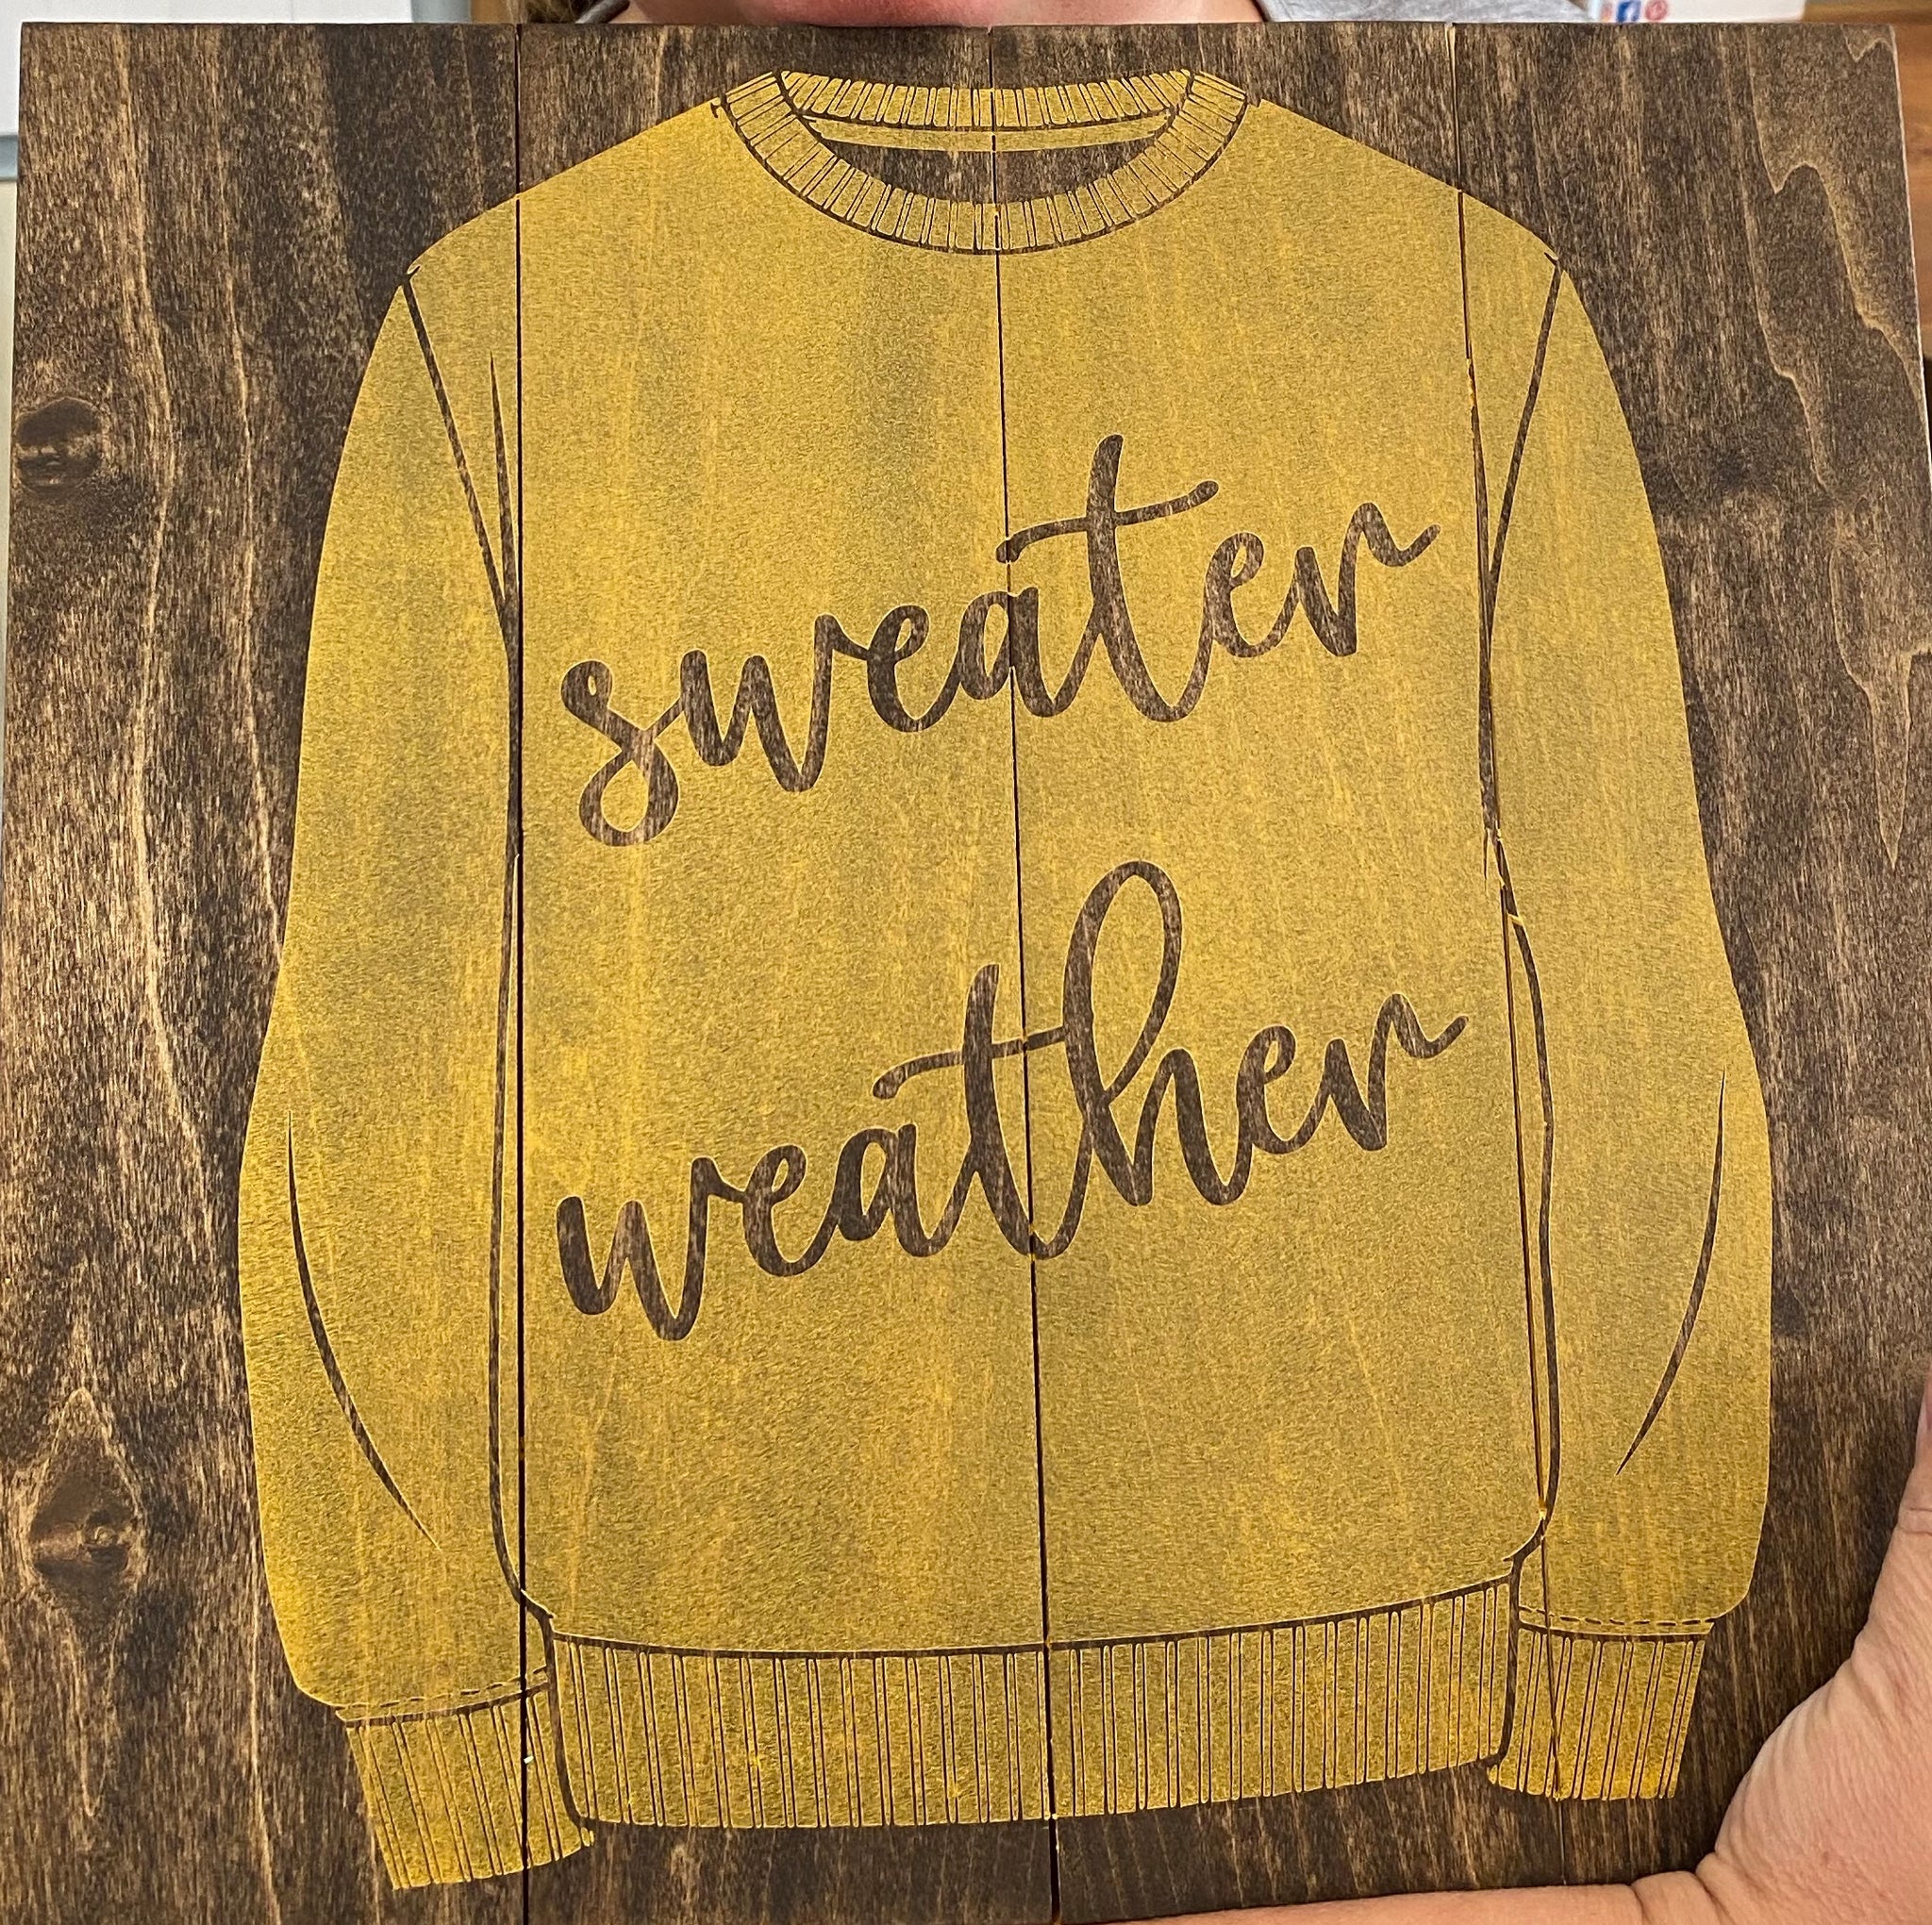 Sweater Weather 14" Square Sign